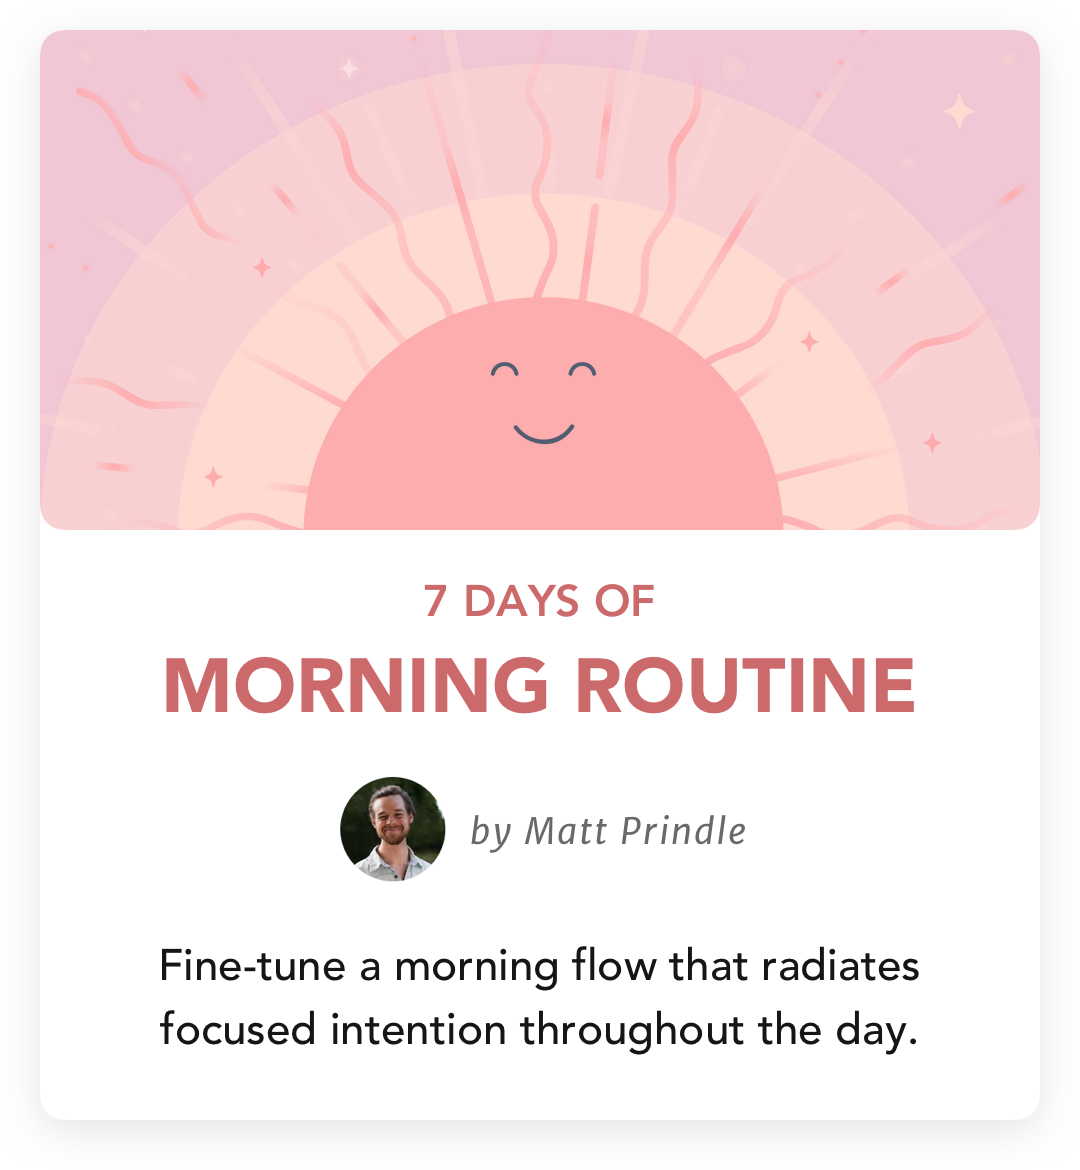 7 Days of Morning Routine